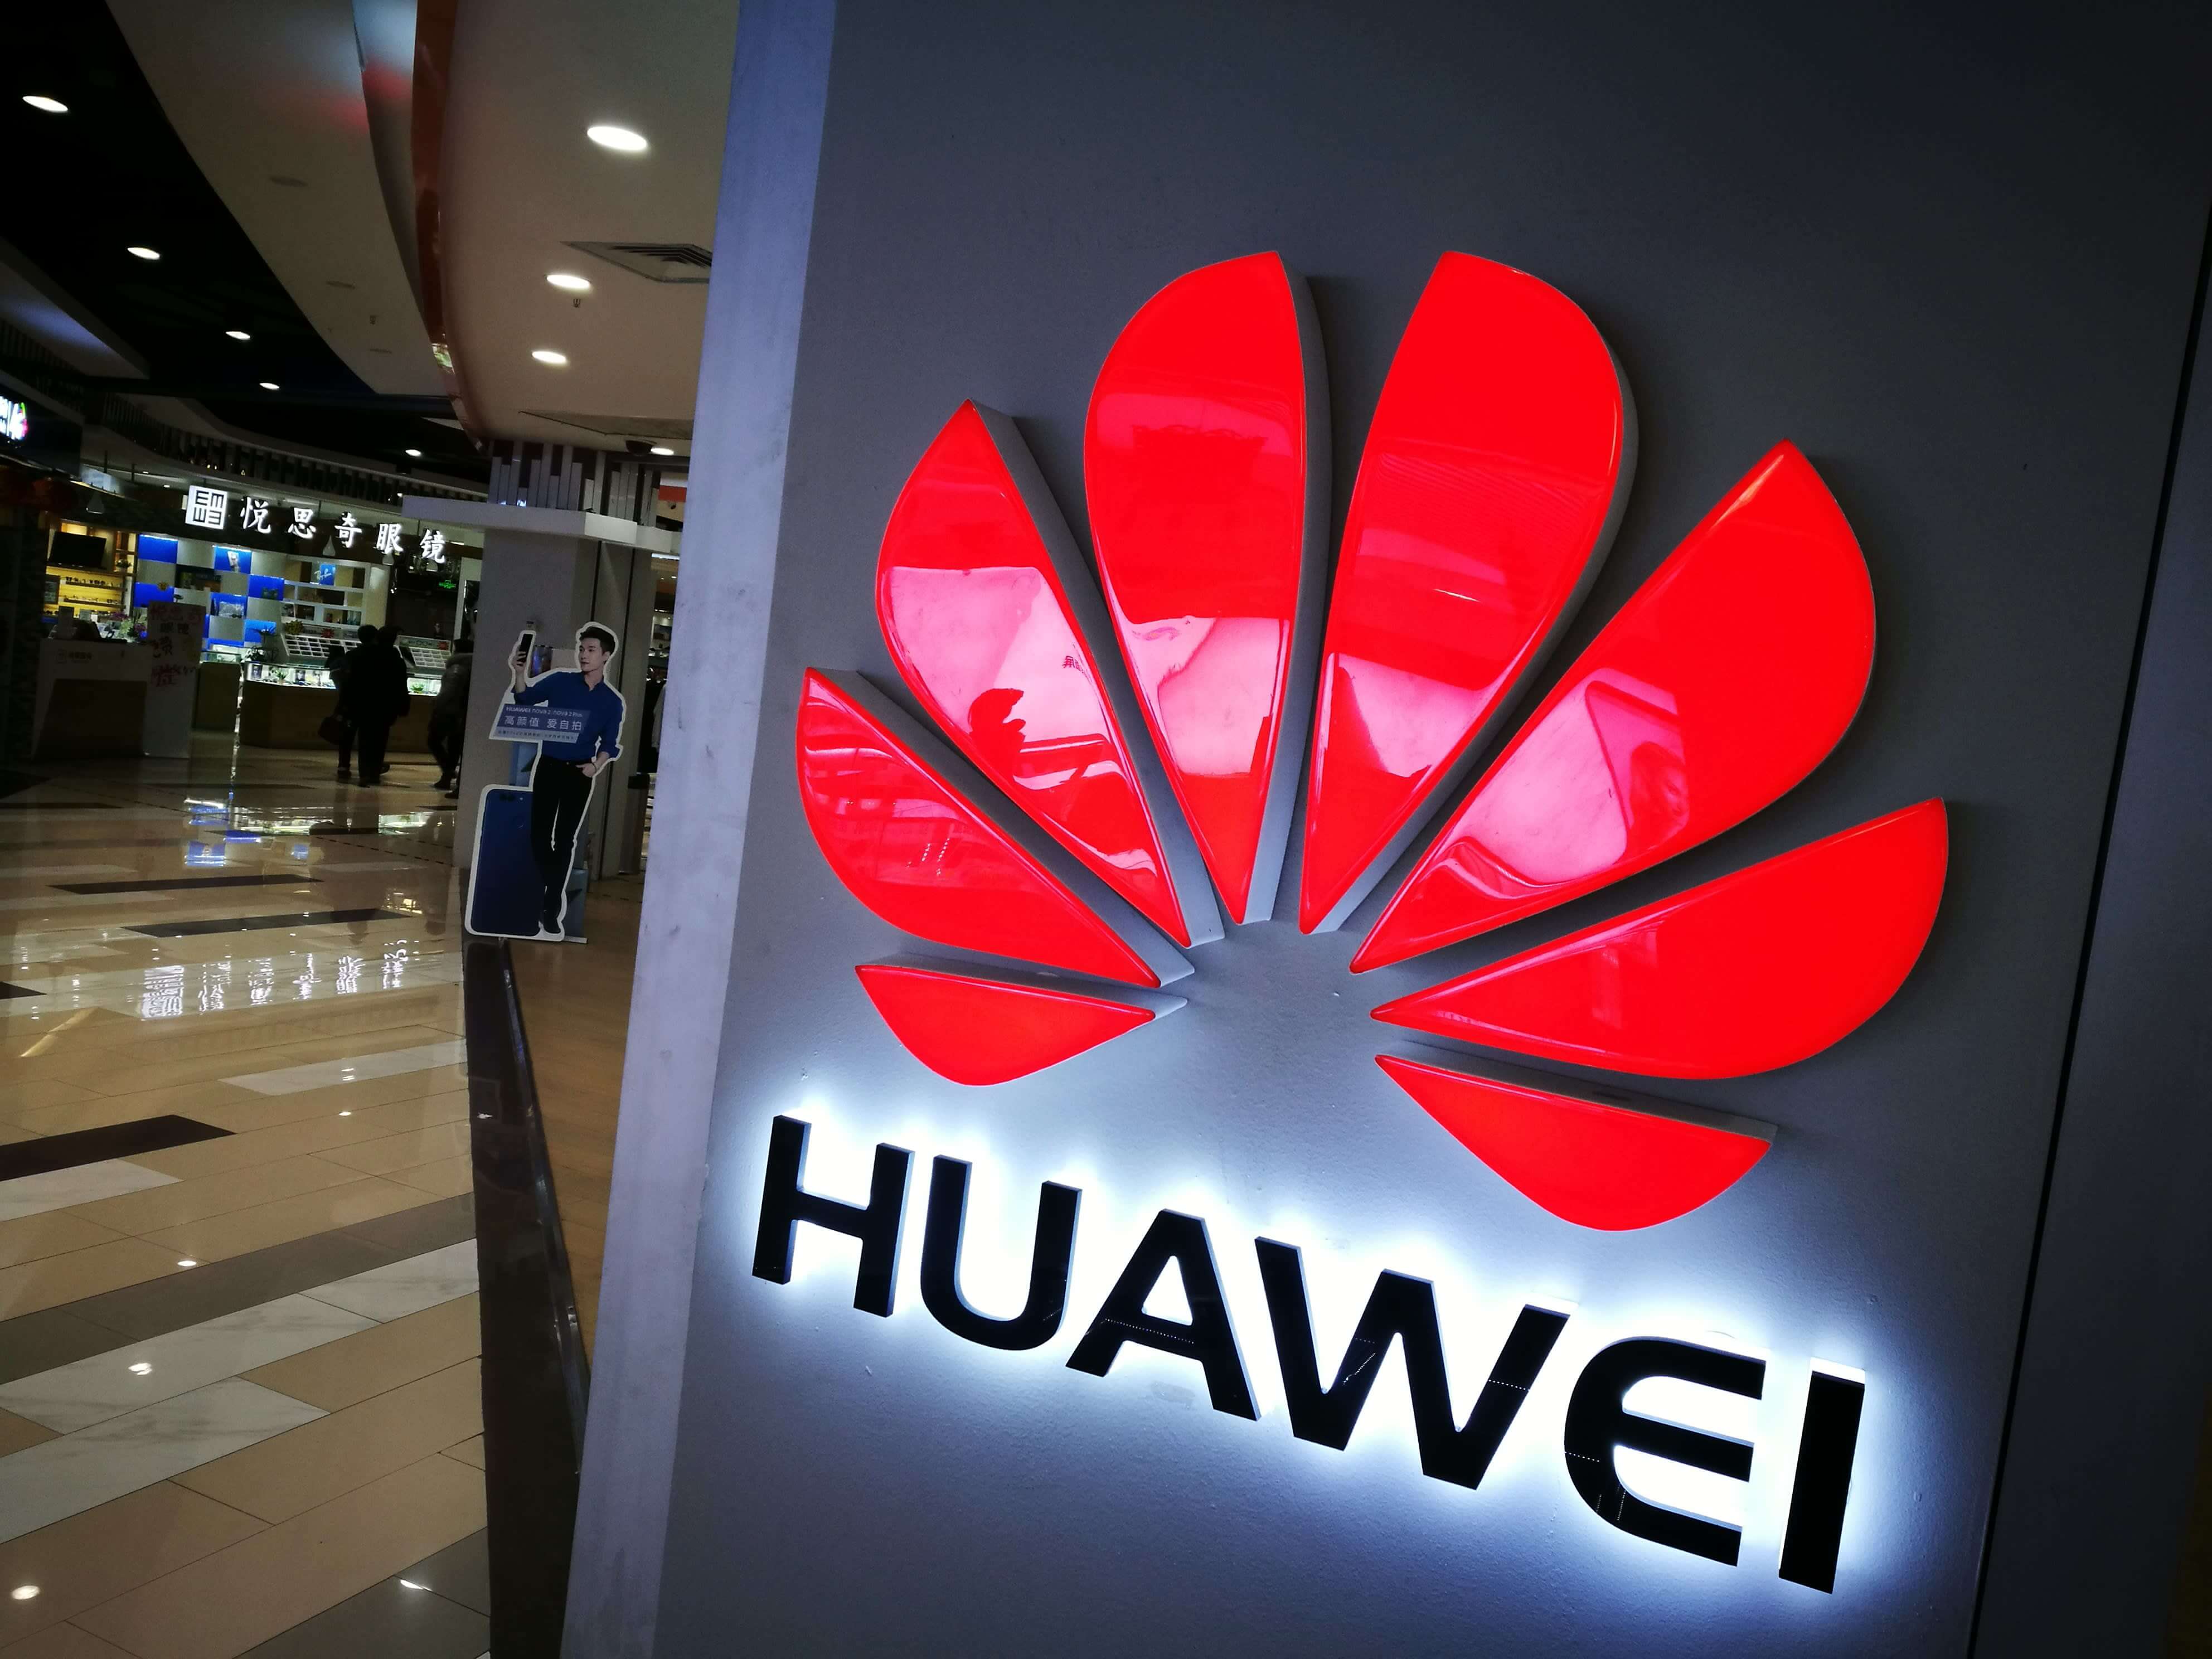 Huawei avoids Trump ban by relaunching old devices as 'New Editions'